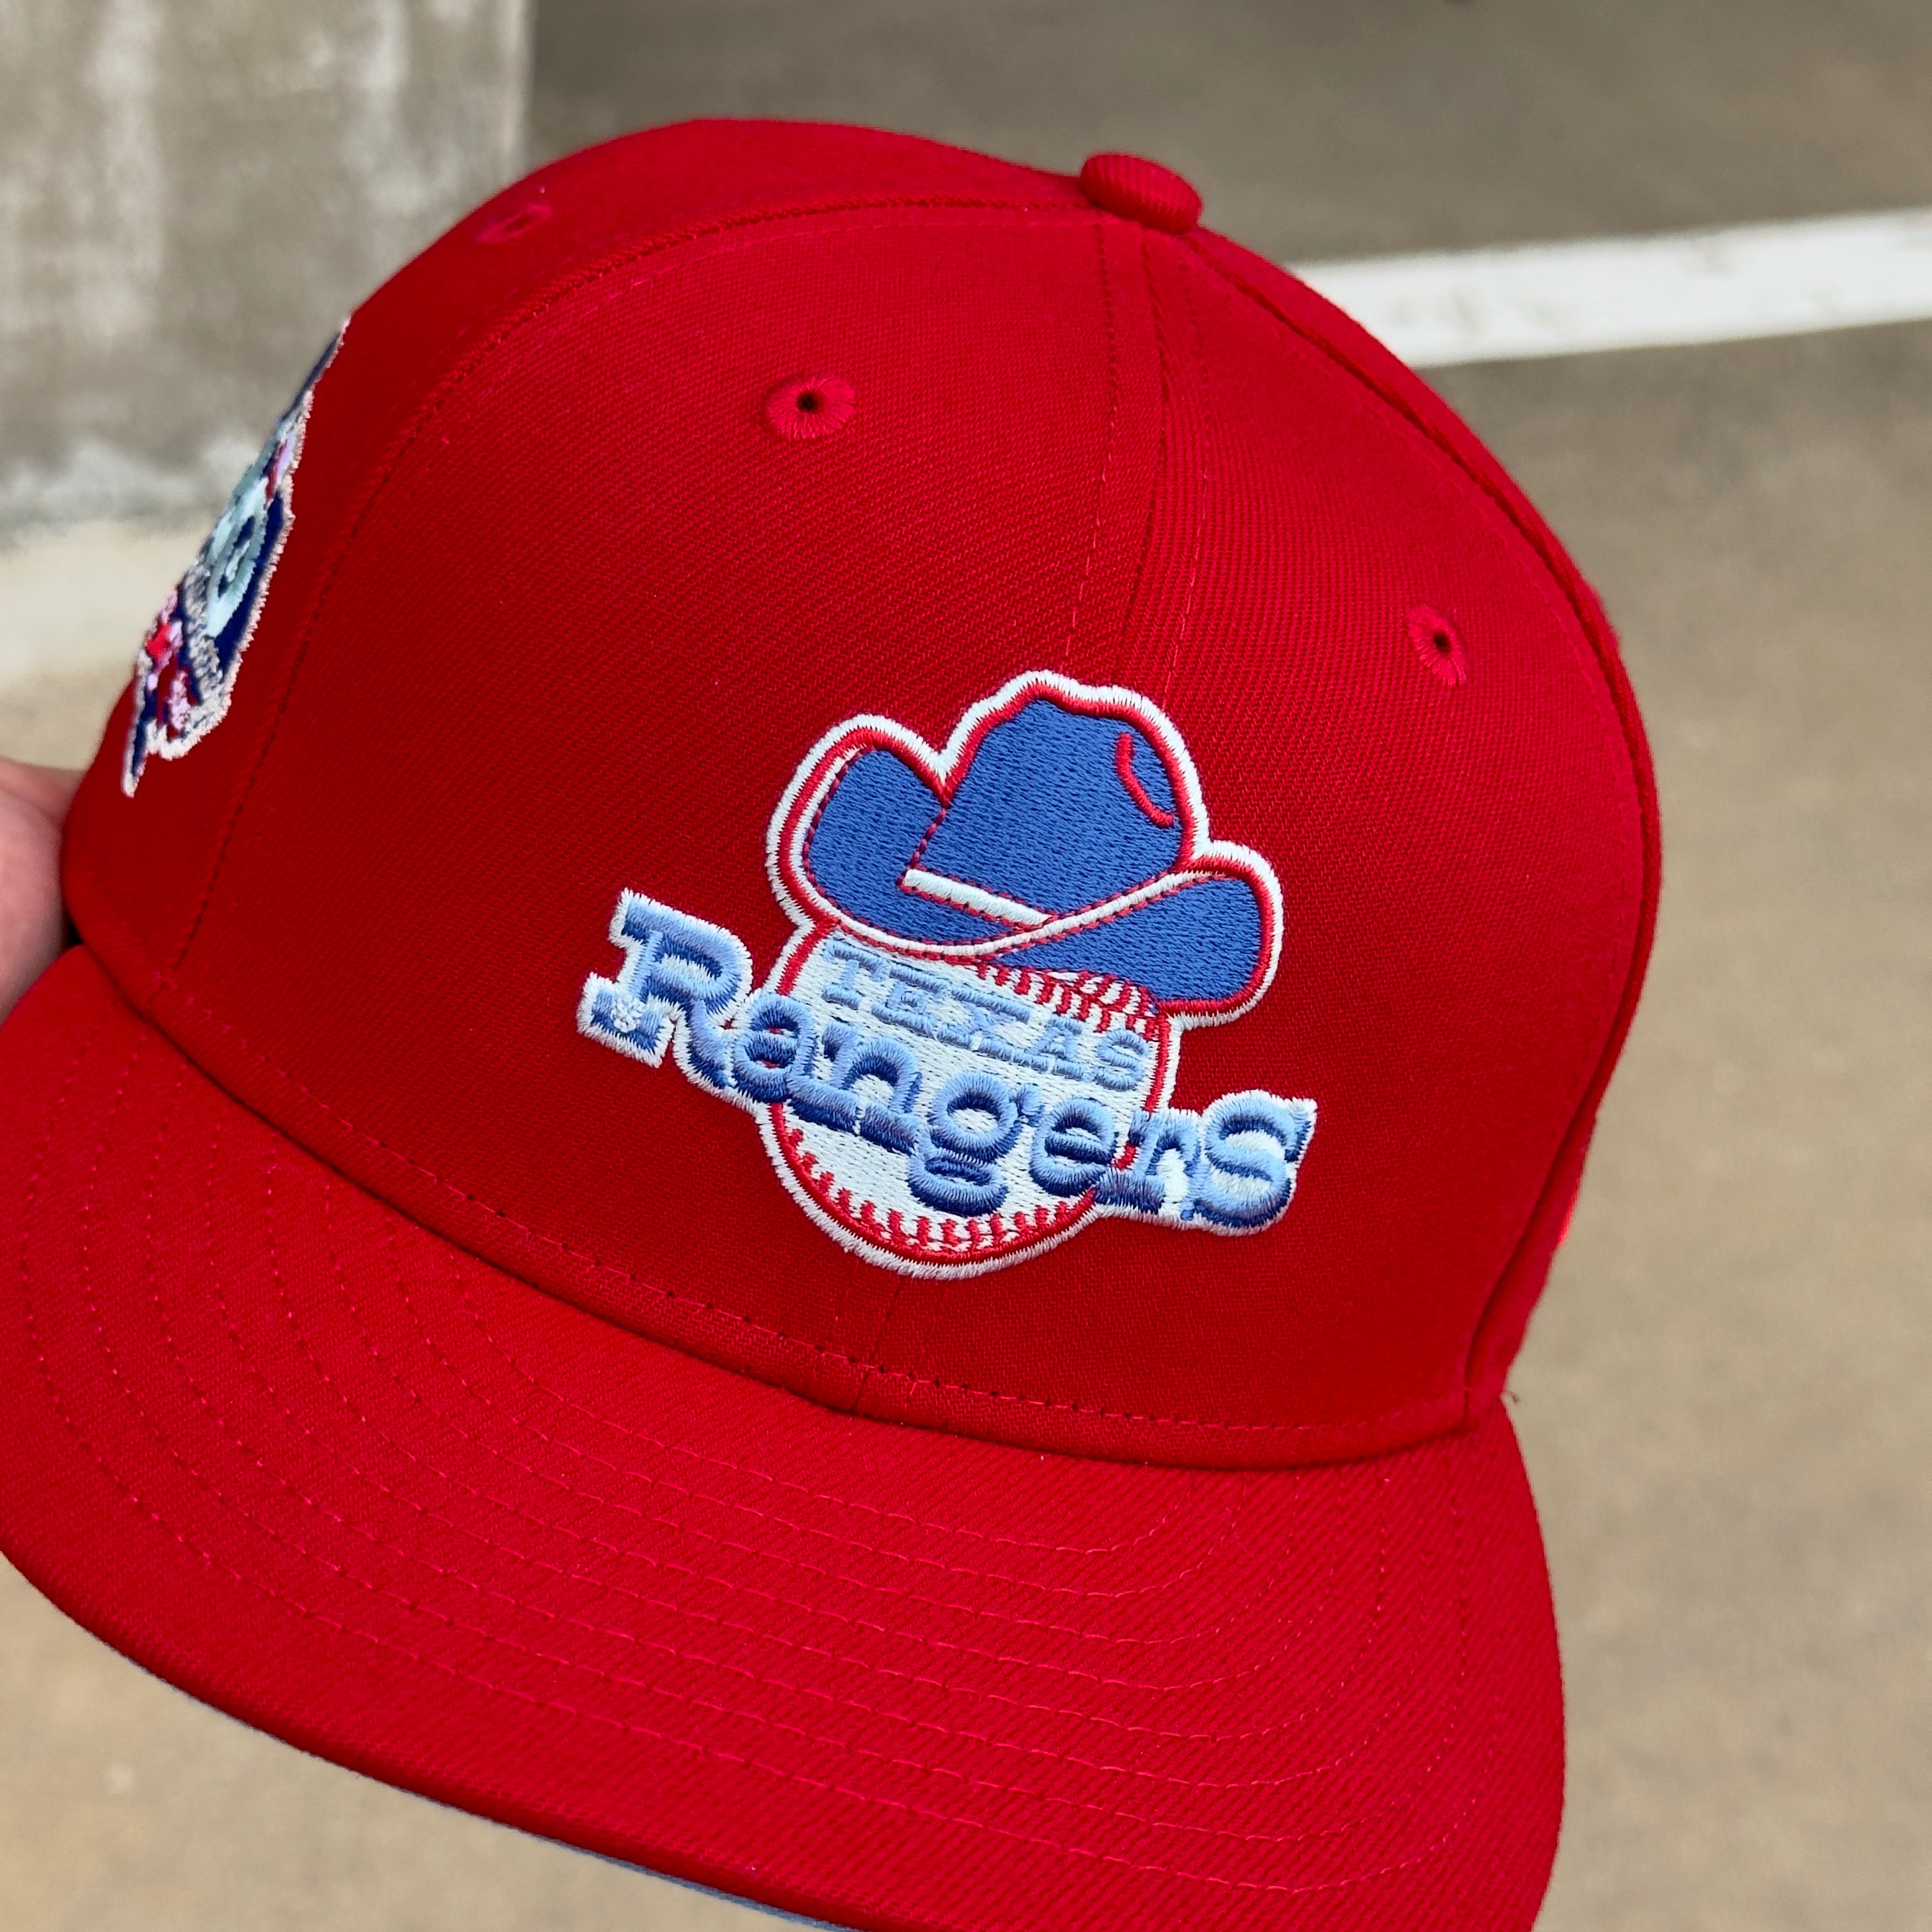 1/8 USED Red Dallas Texas Rangers 40th Anniversary 59fifty New Era Fitted Hat Cap